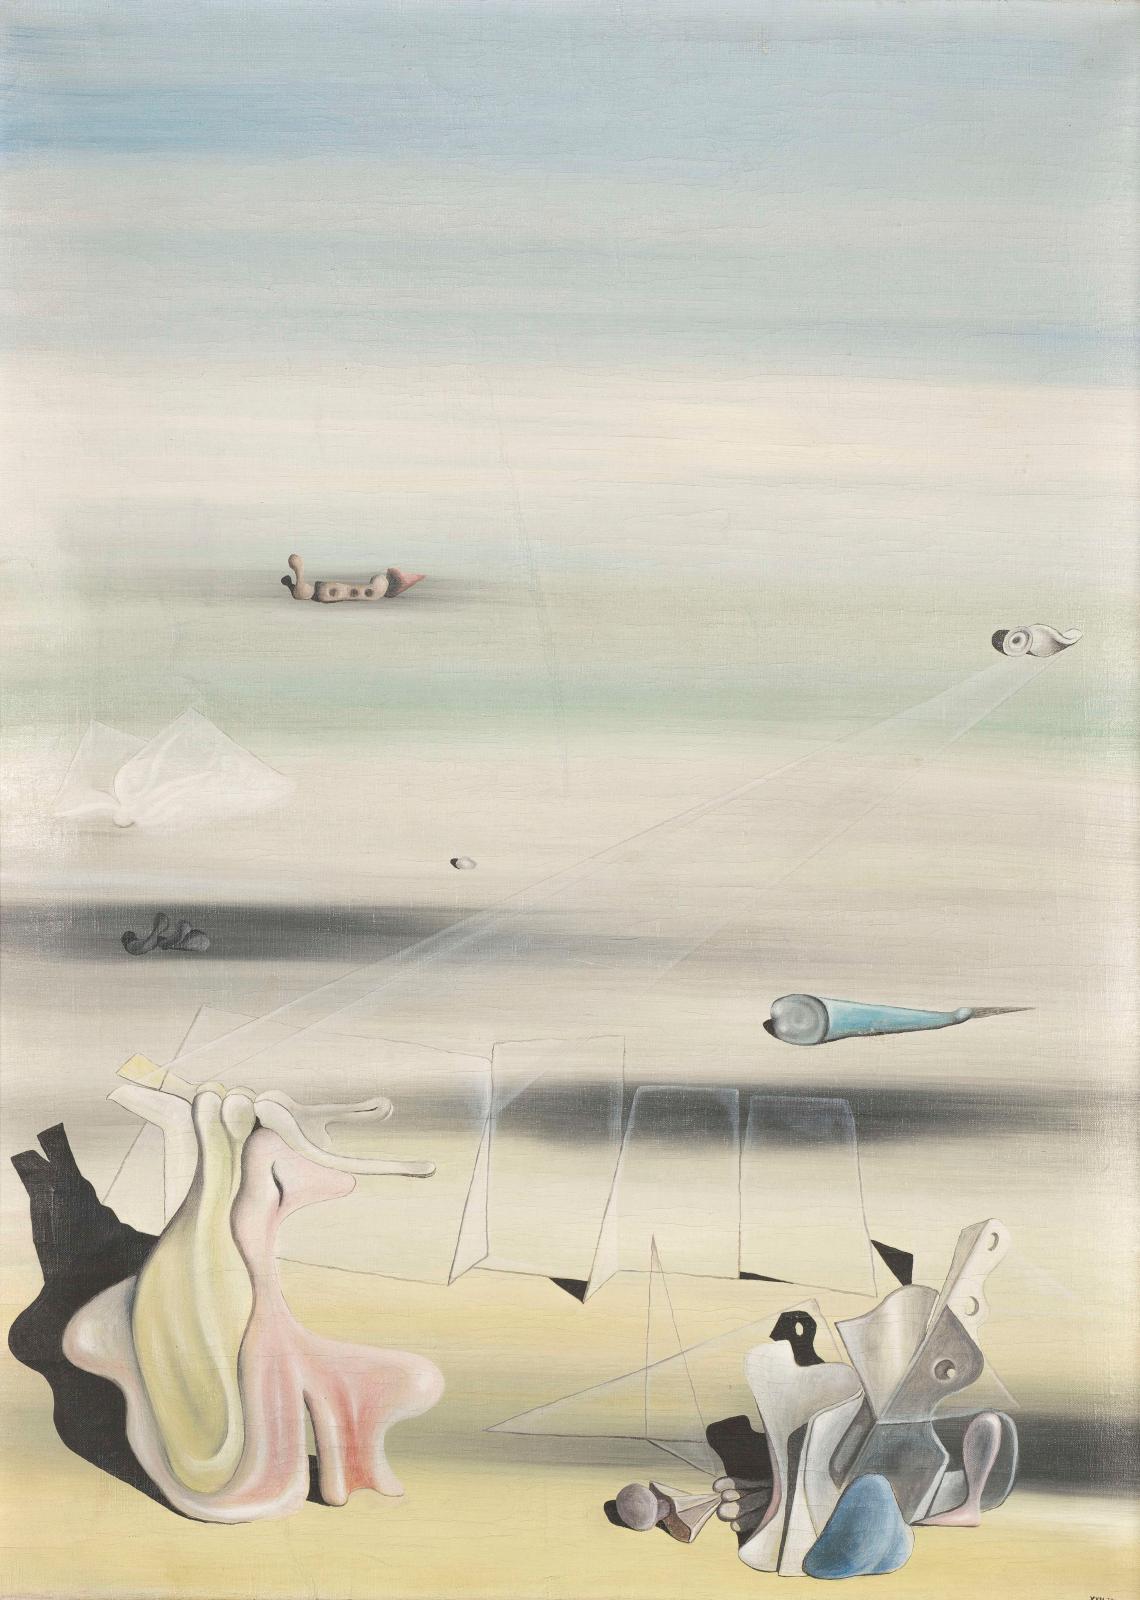 Les fictions d’Yves Tanguy